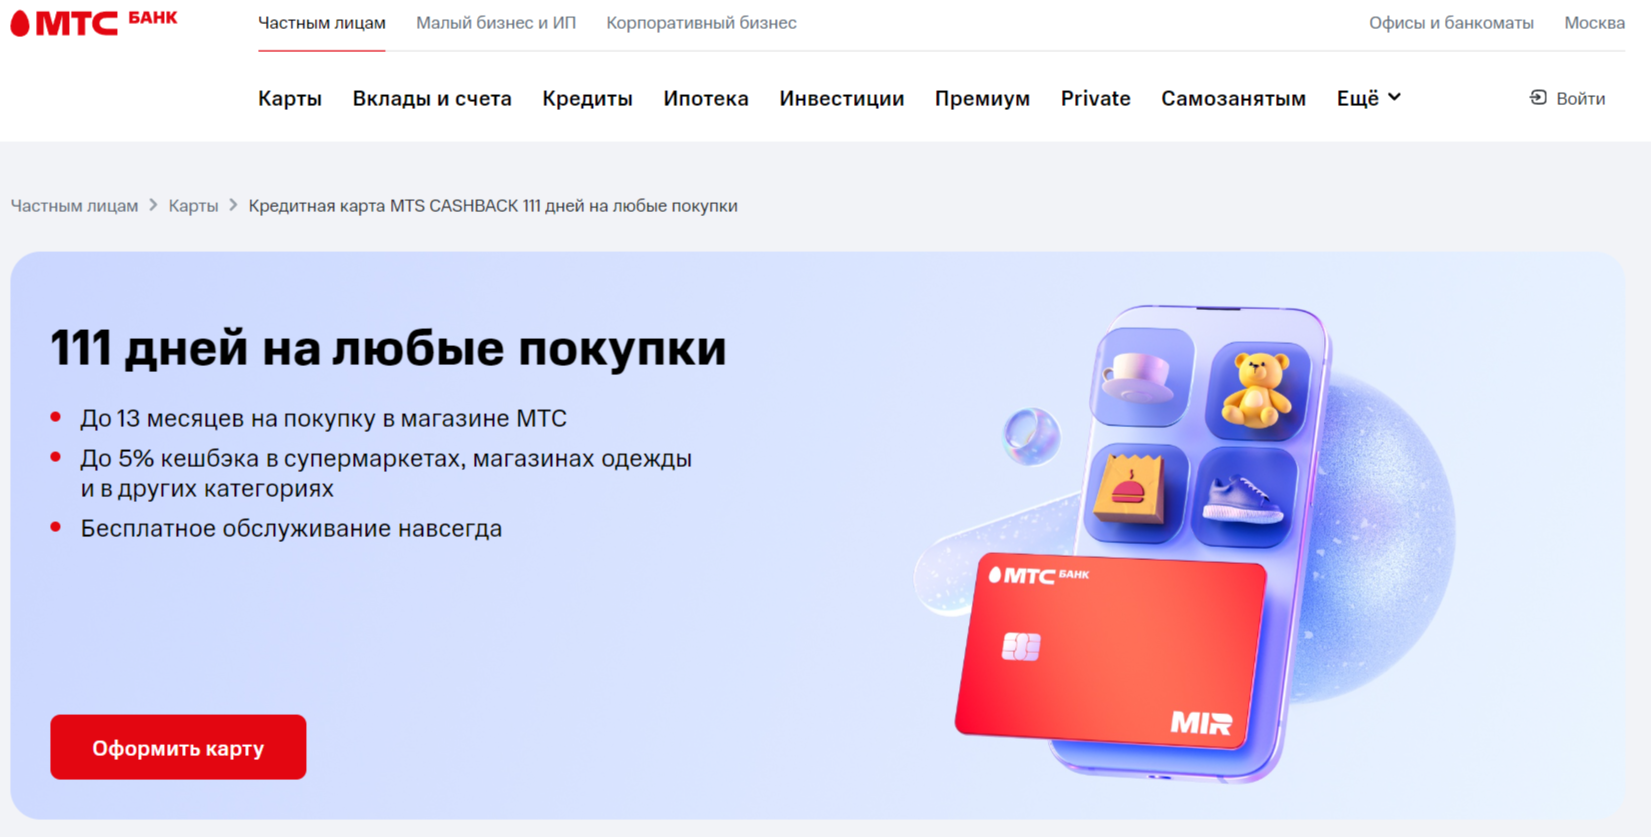 TOP 20 credit cards with mail delivery - the best cards with delivery in Russia - Tinkoff Bank, Bank, Sberbank, VTB Bank, Bank card, Alfa Bank, MTS, Credit, Credit card, Credit history, Mts-Bank, Company Blogs, Longpost